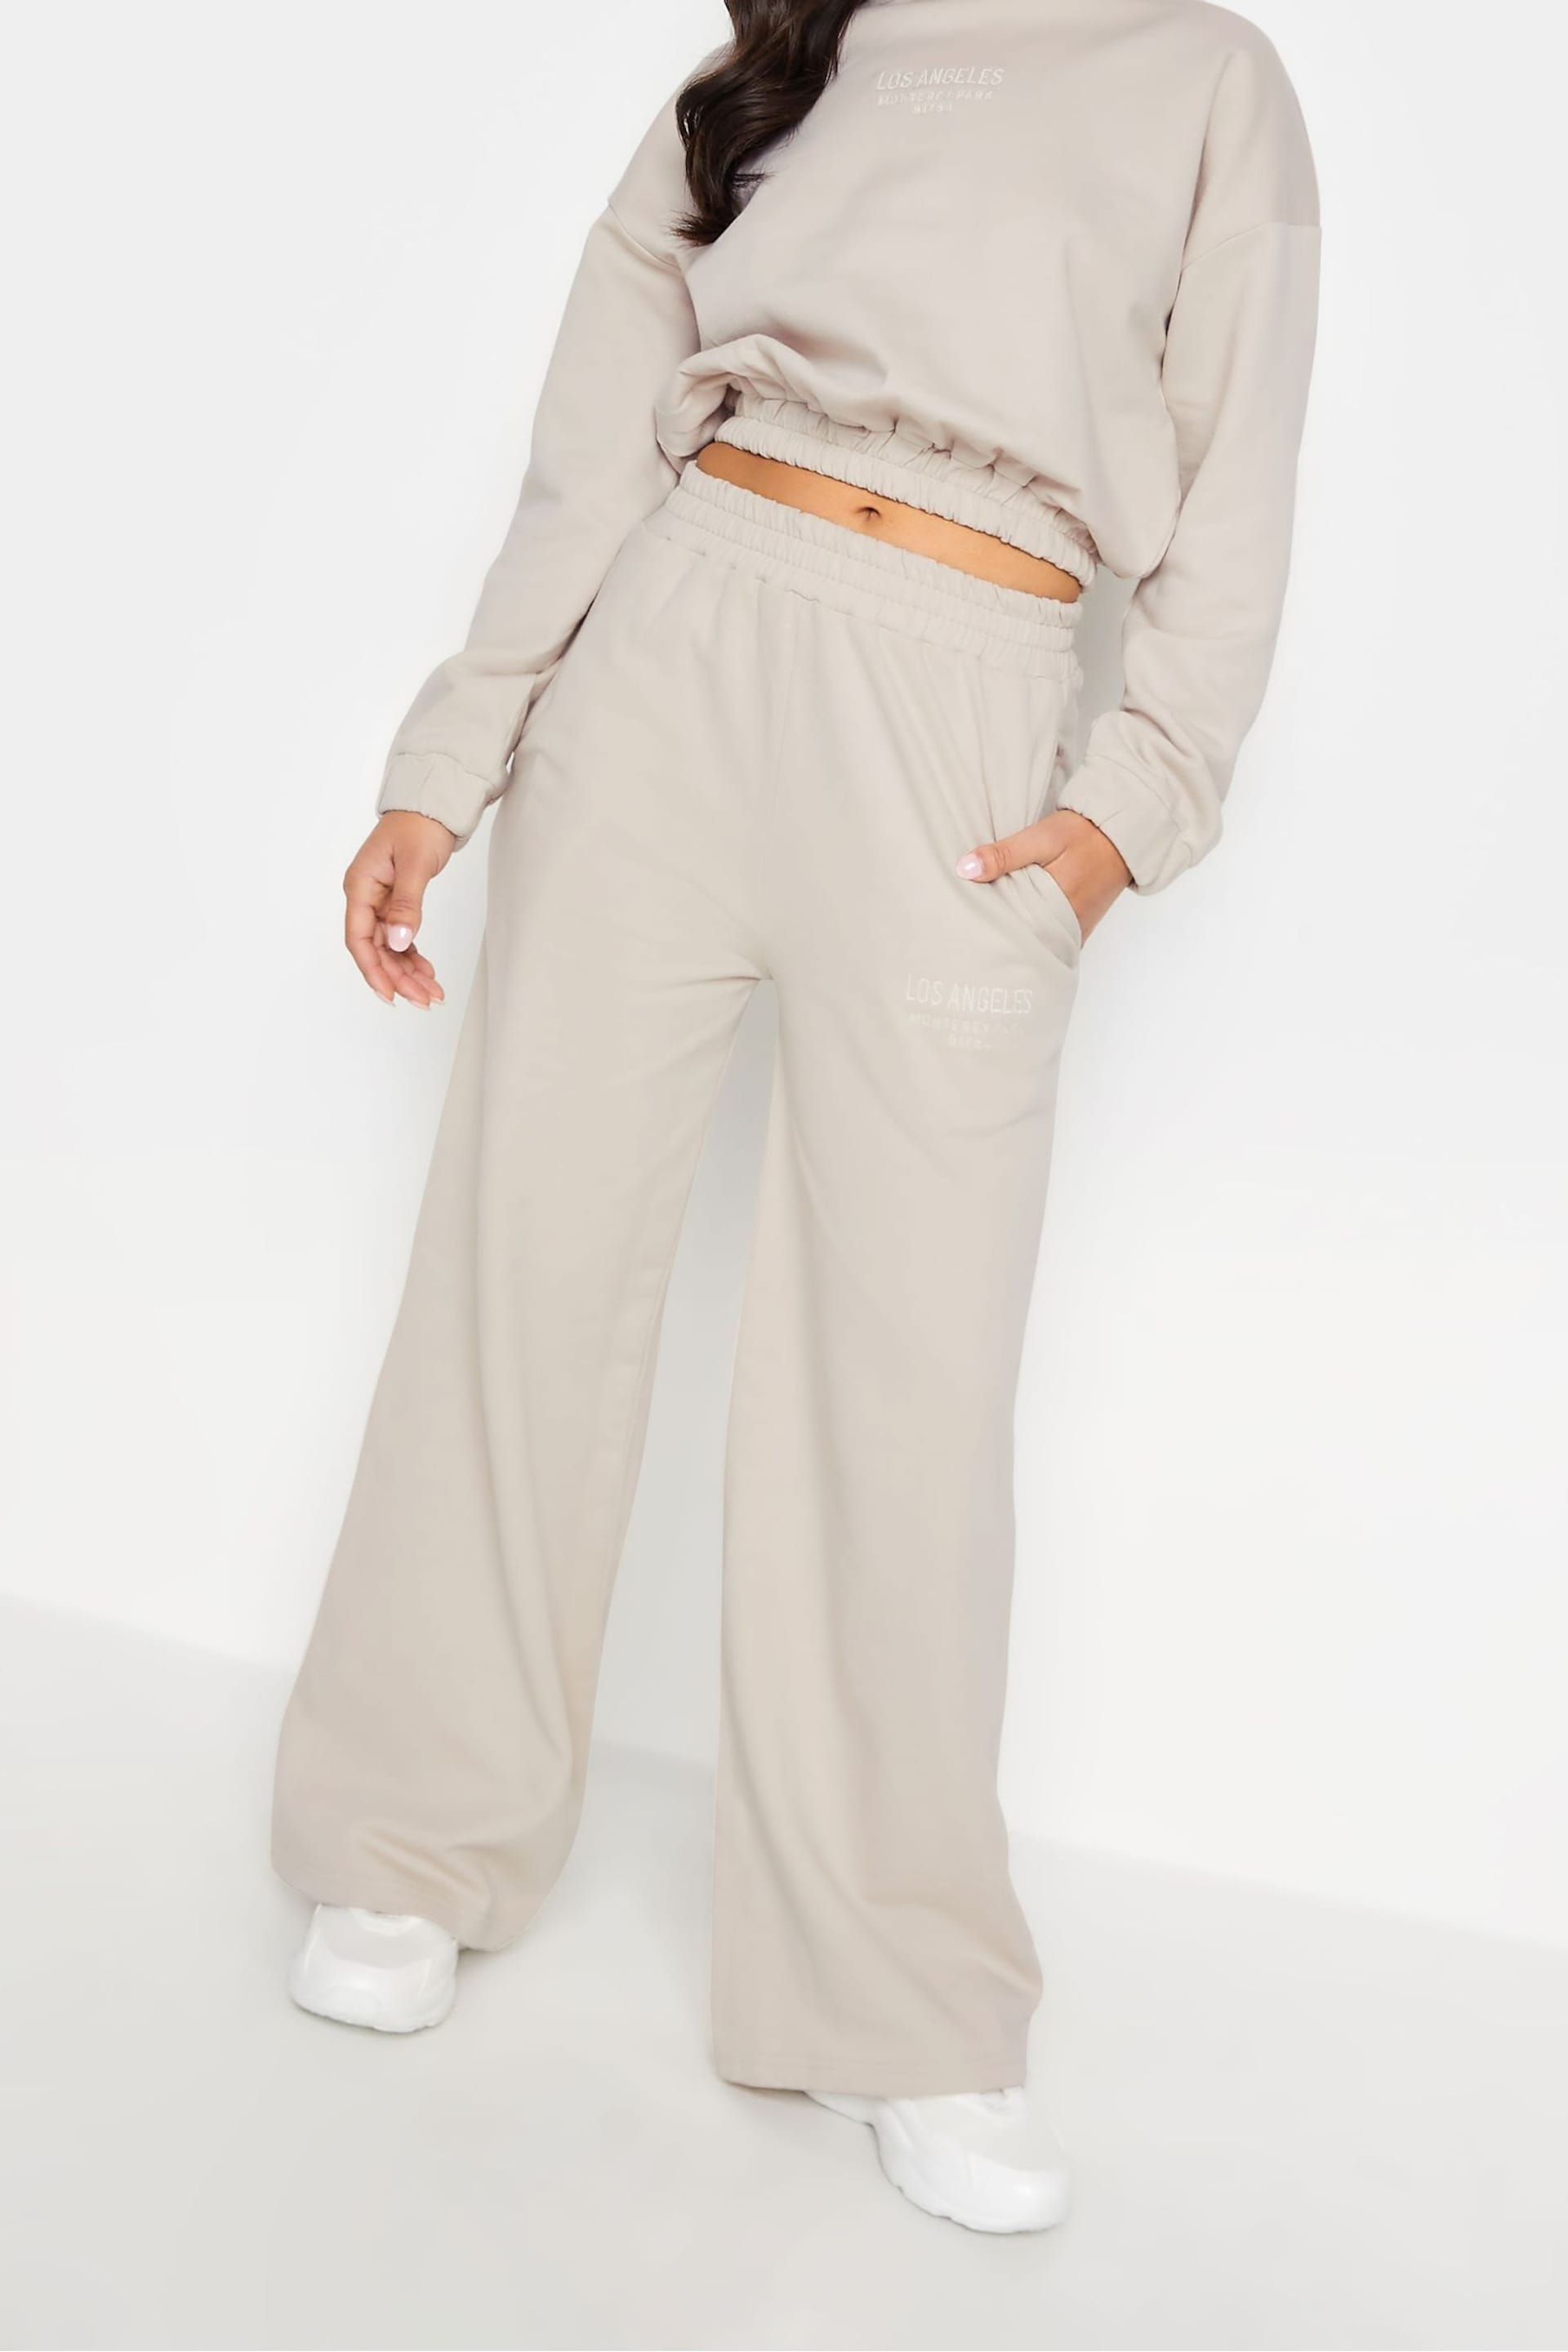 PixieGirl Petite Natural Los Angeles Embroidered Wide Leg Joggers - Image 3 of 5